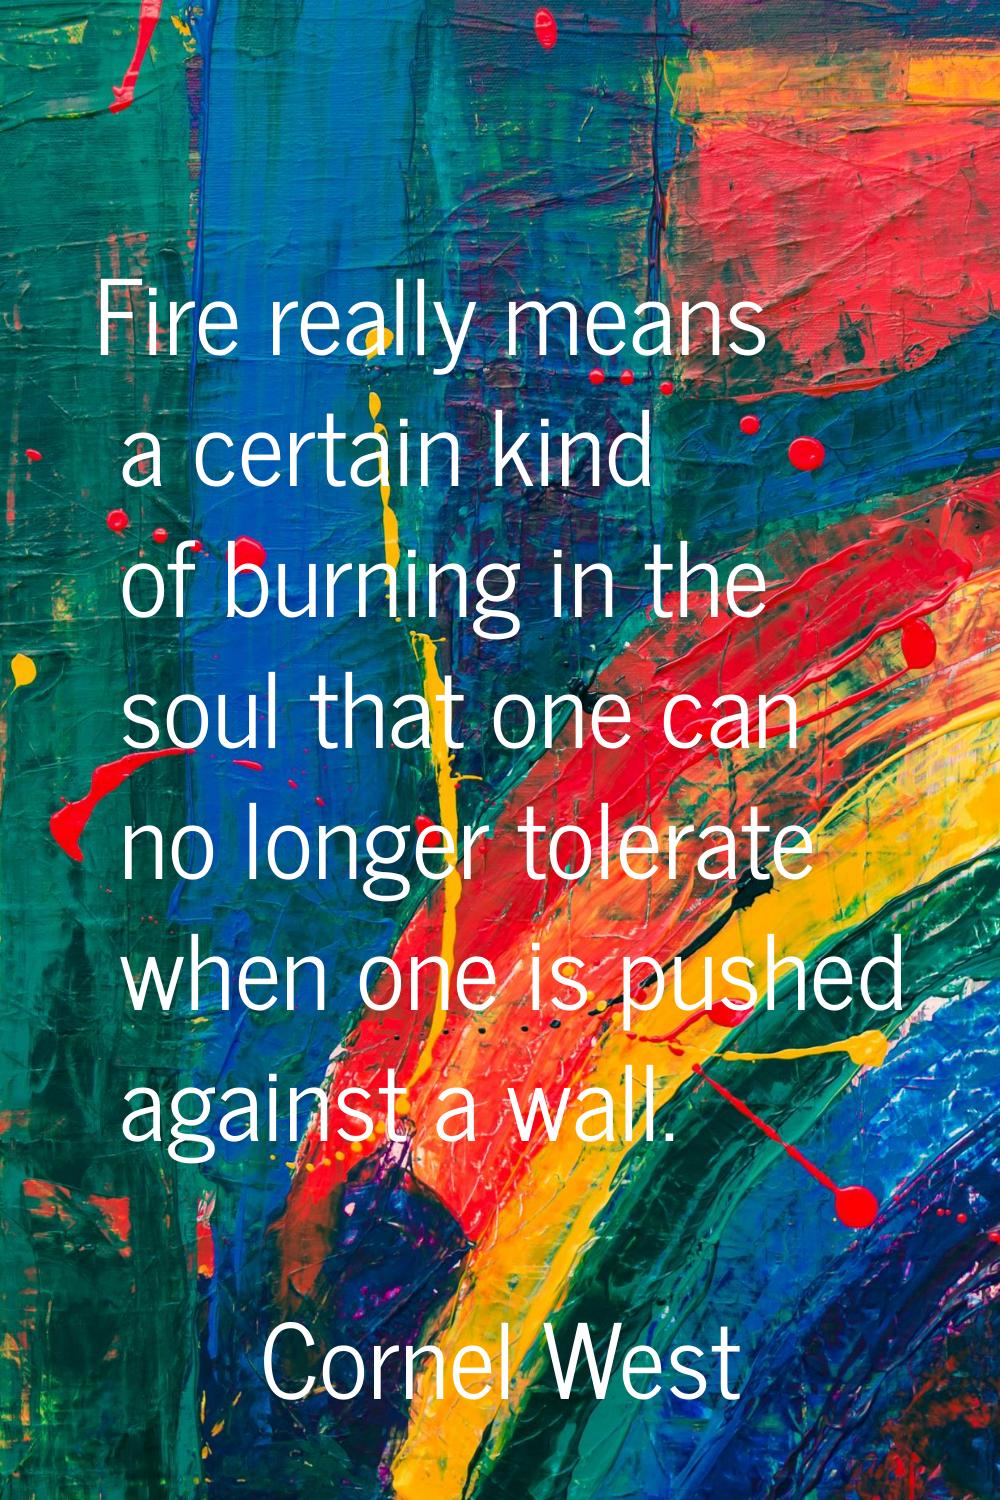 Fire really means a certain kind of burning in the soul that one can no longer tolerate when one is